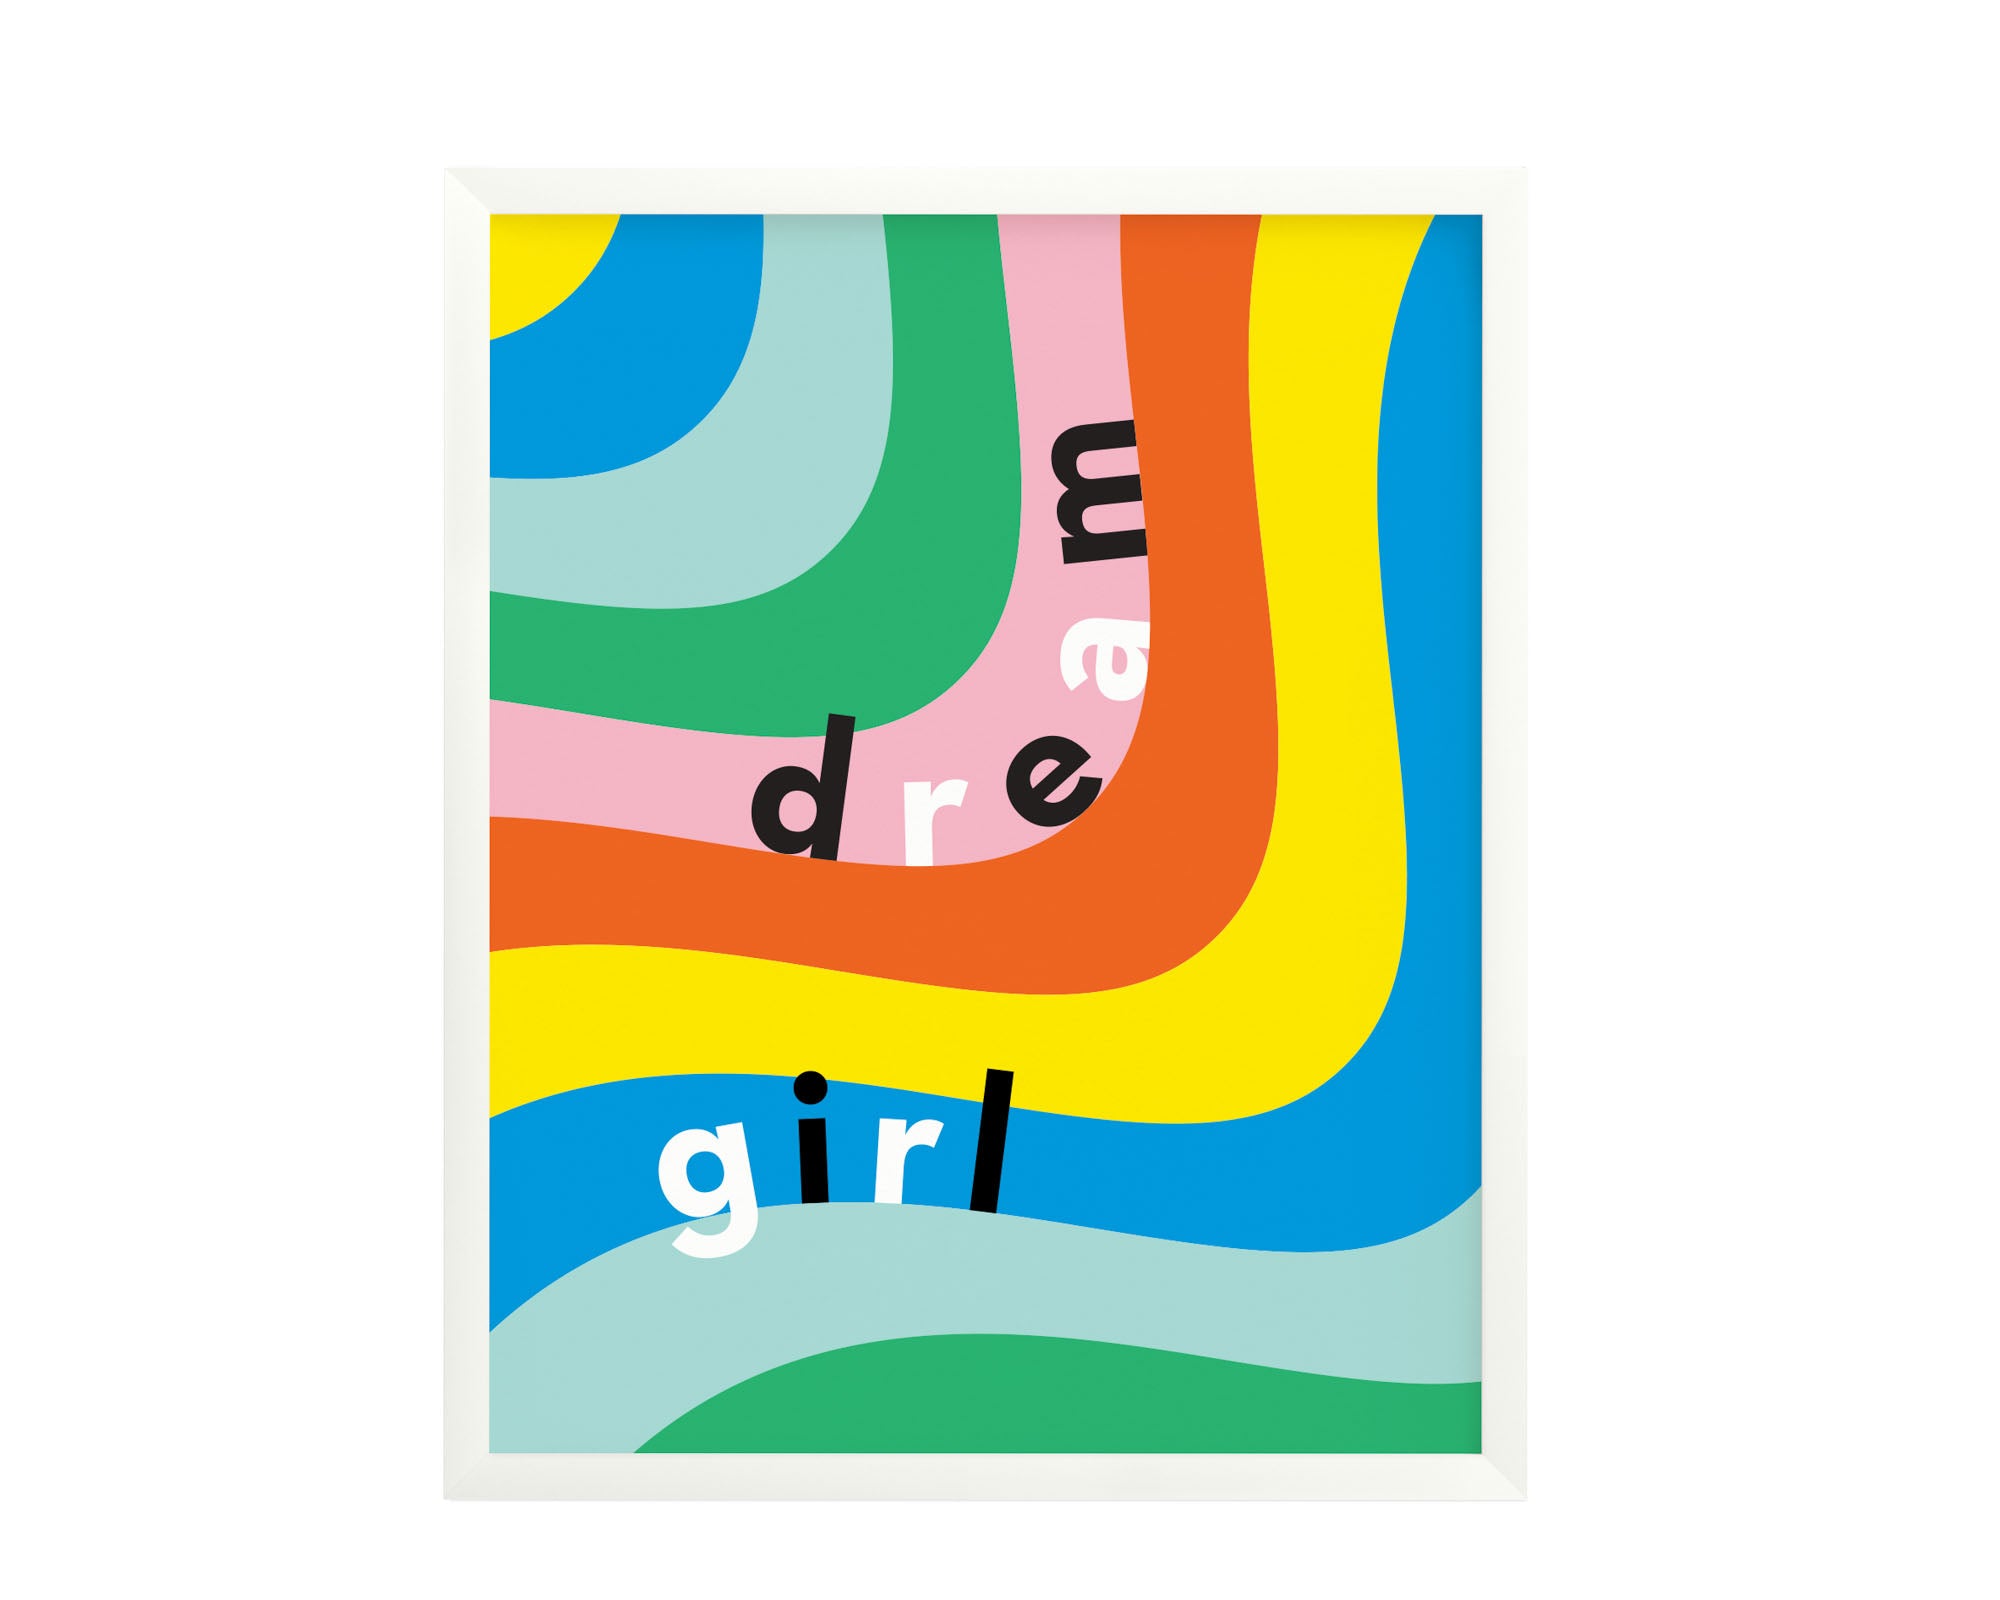 "Dream Girl" psychedelic typographic rainbow archival giclée art print. Made in USA by My Darlin' @mydarlin_bk